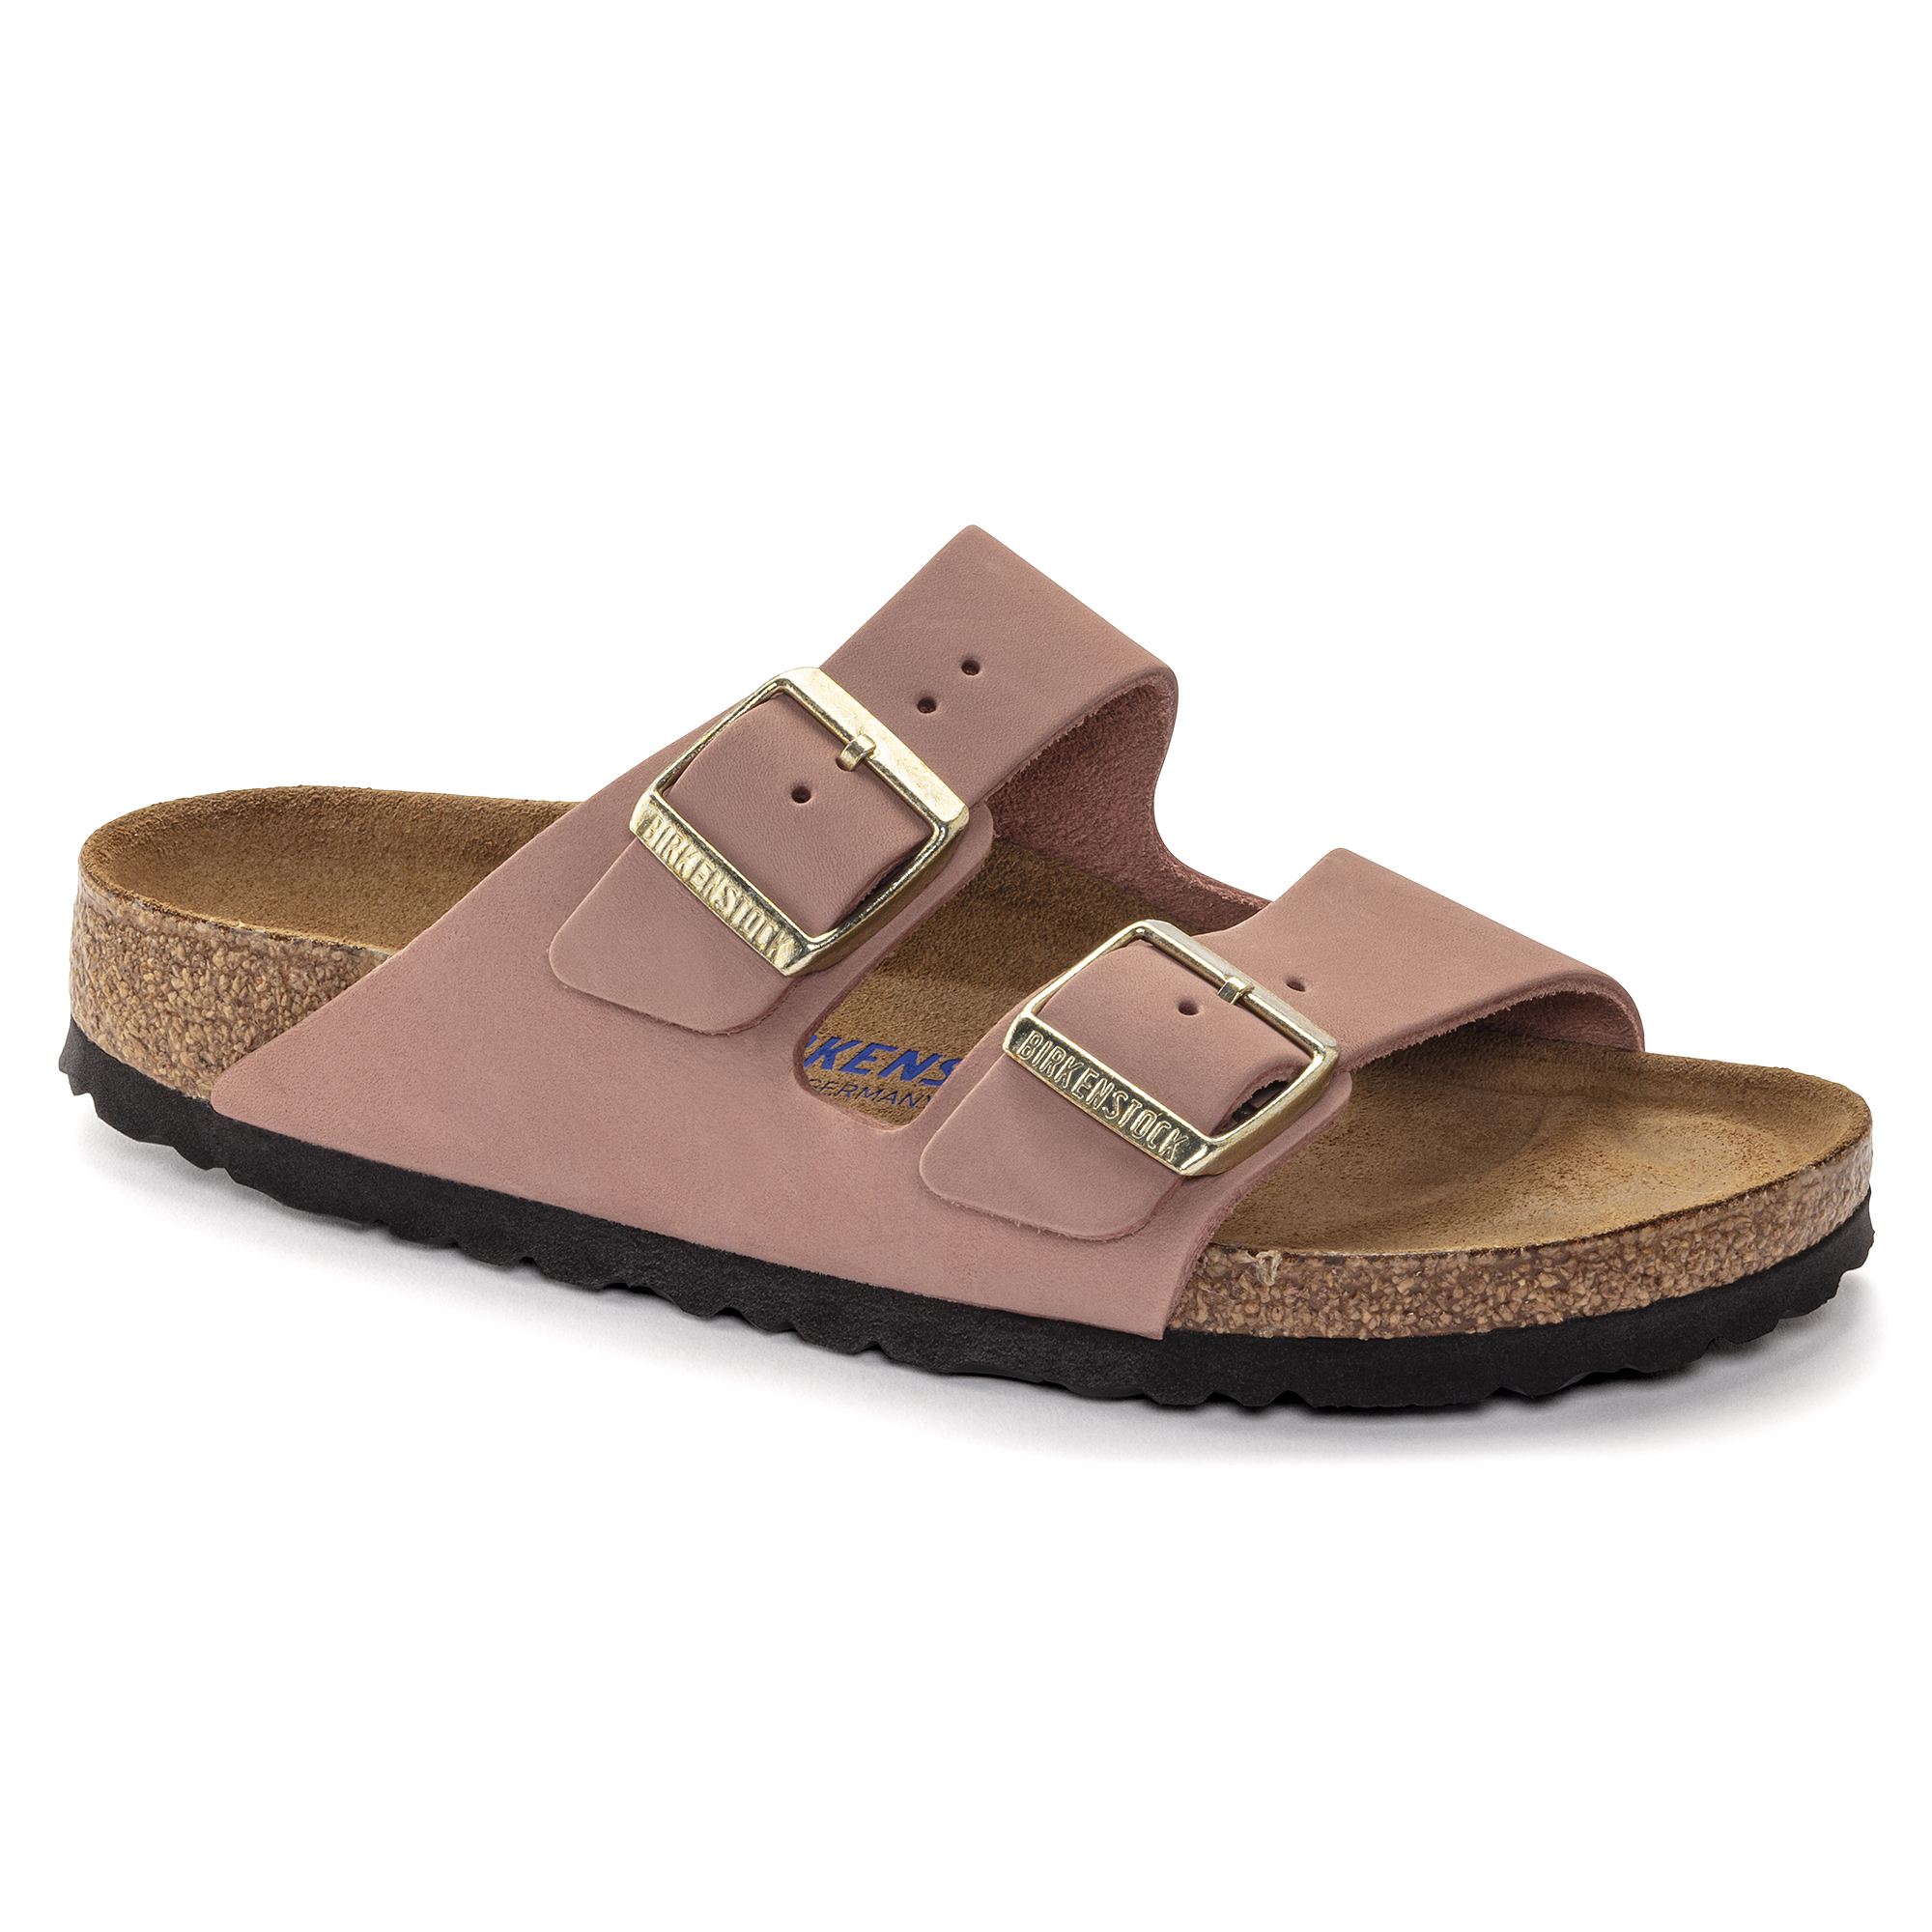 Birkenstock Arizona Sandals Review: What to Consider Before Buying